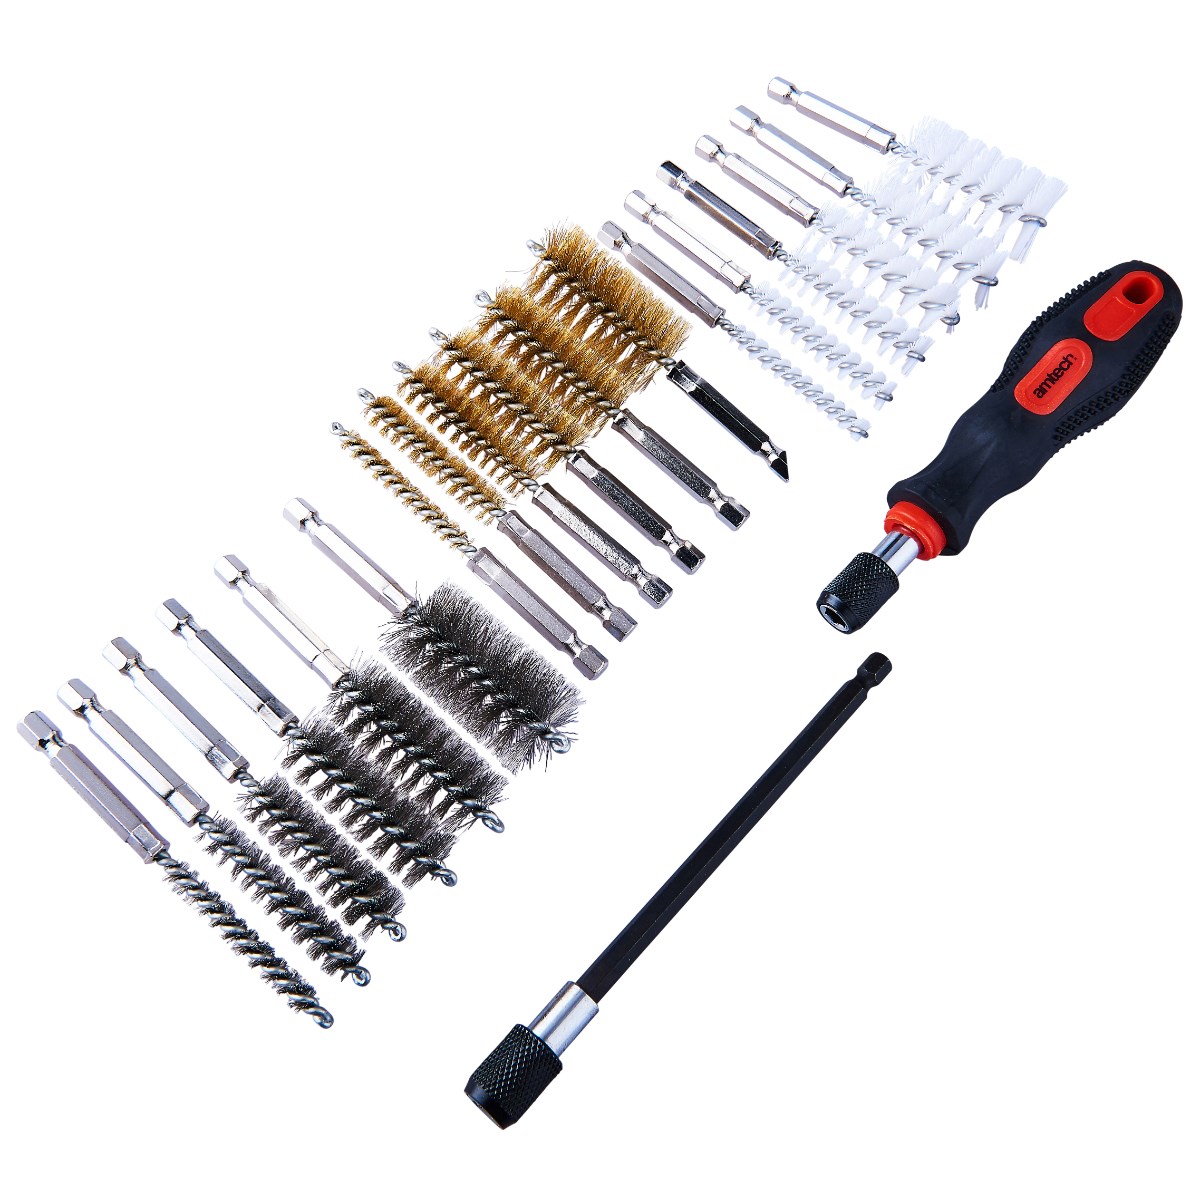 20pc wire brush cleaning kit - Amtech